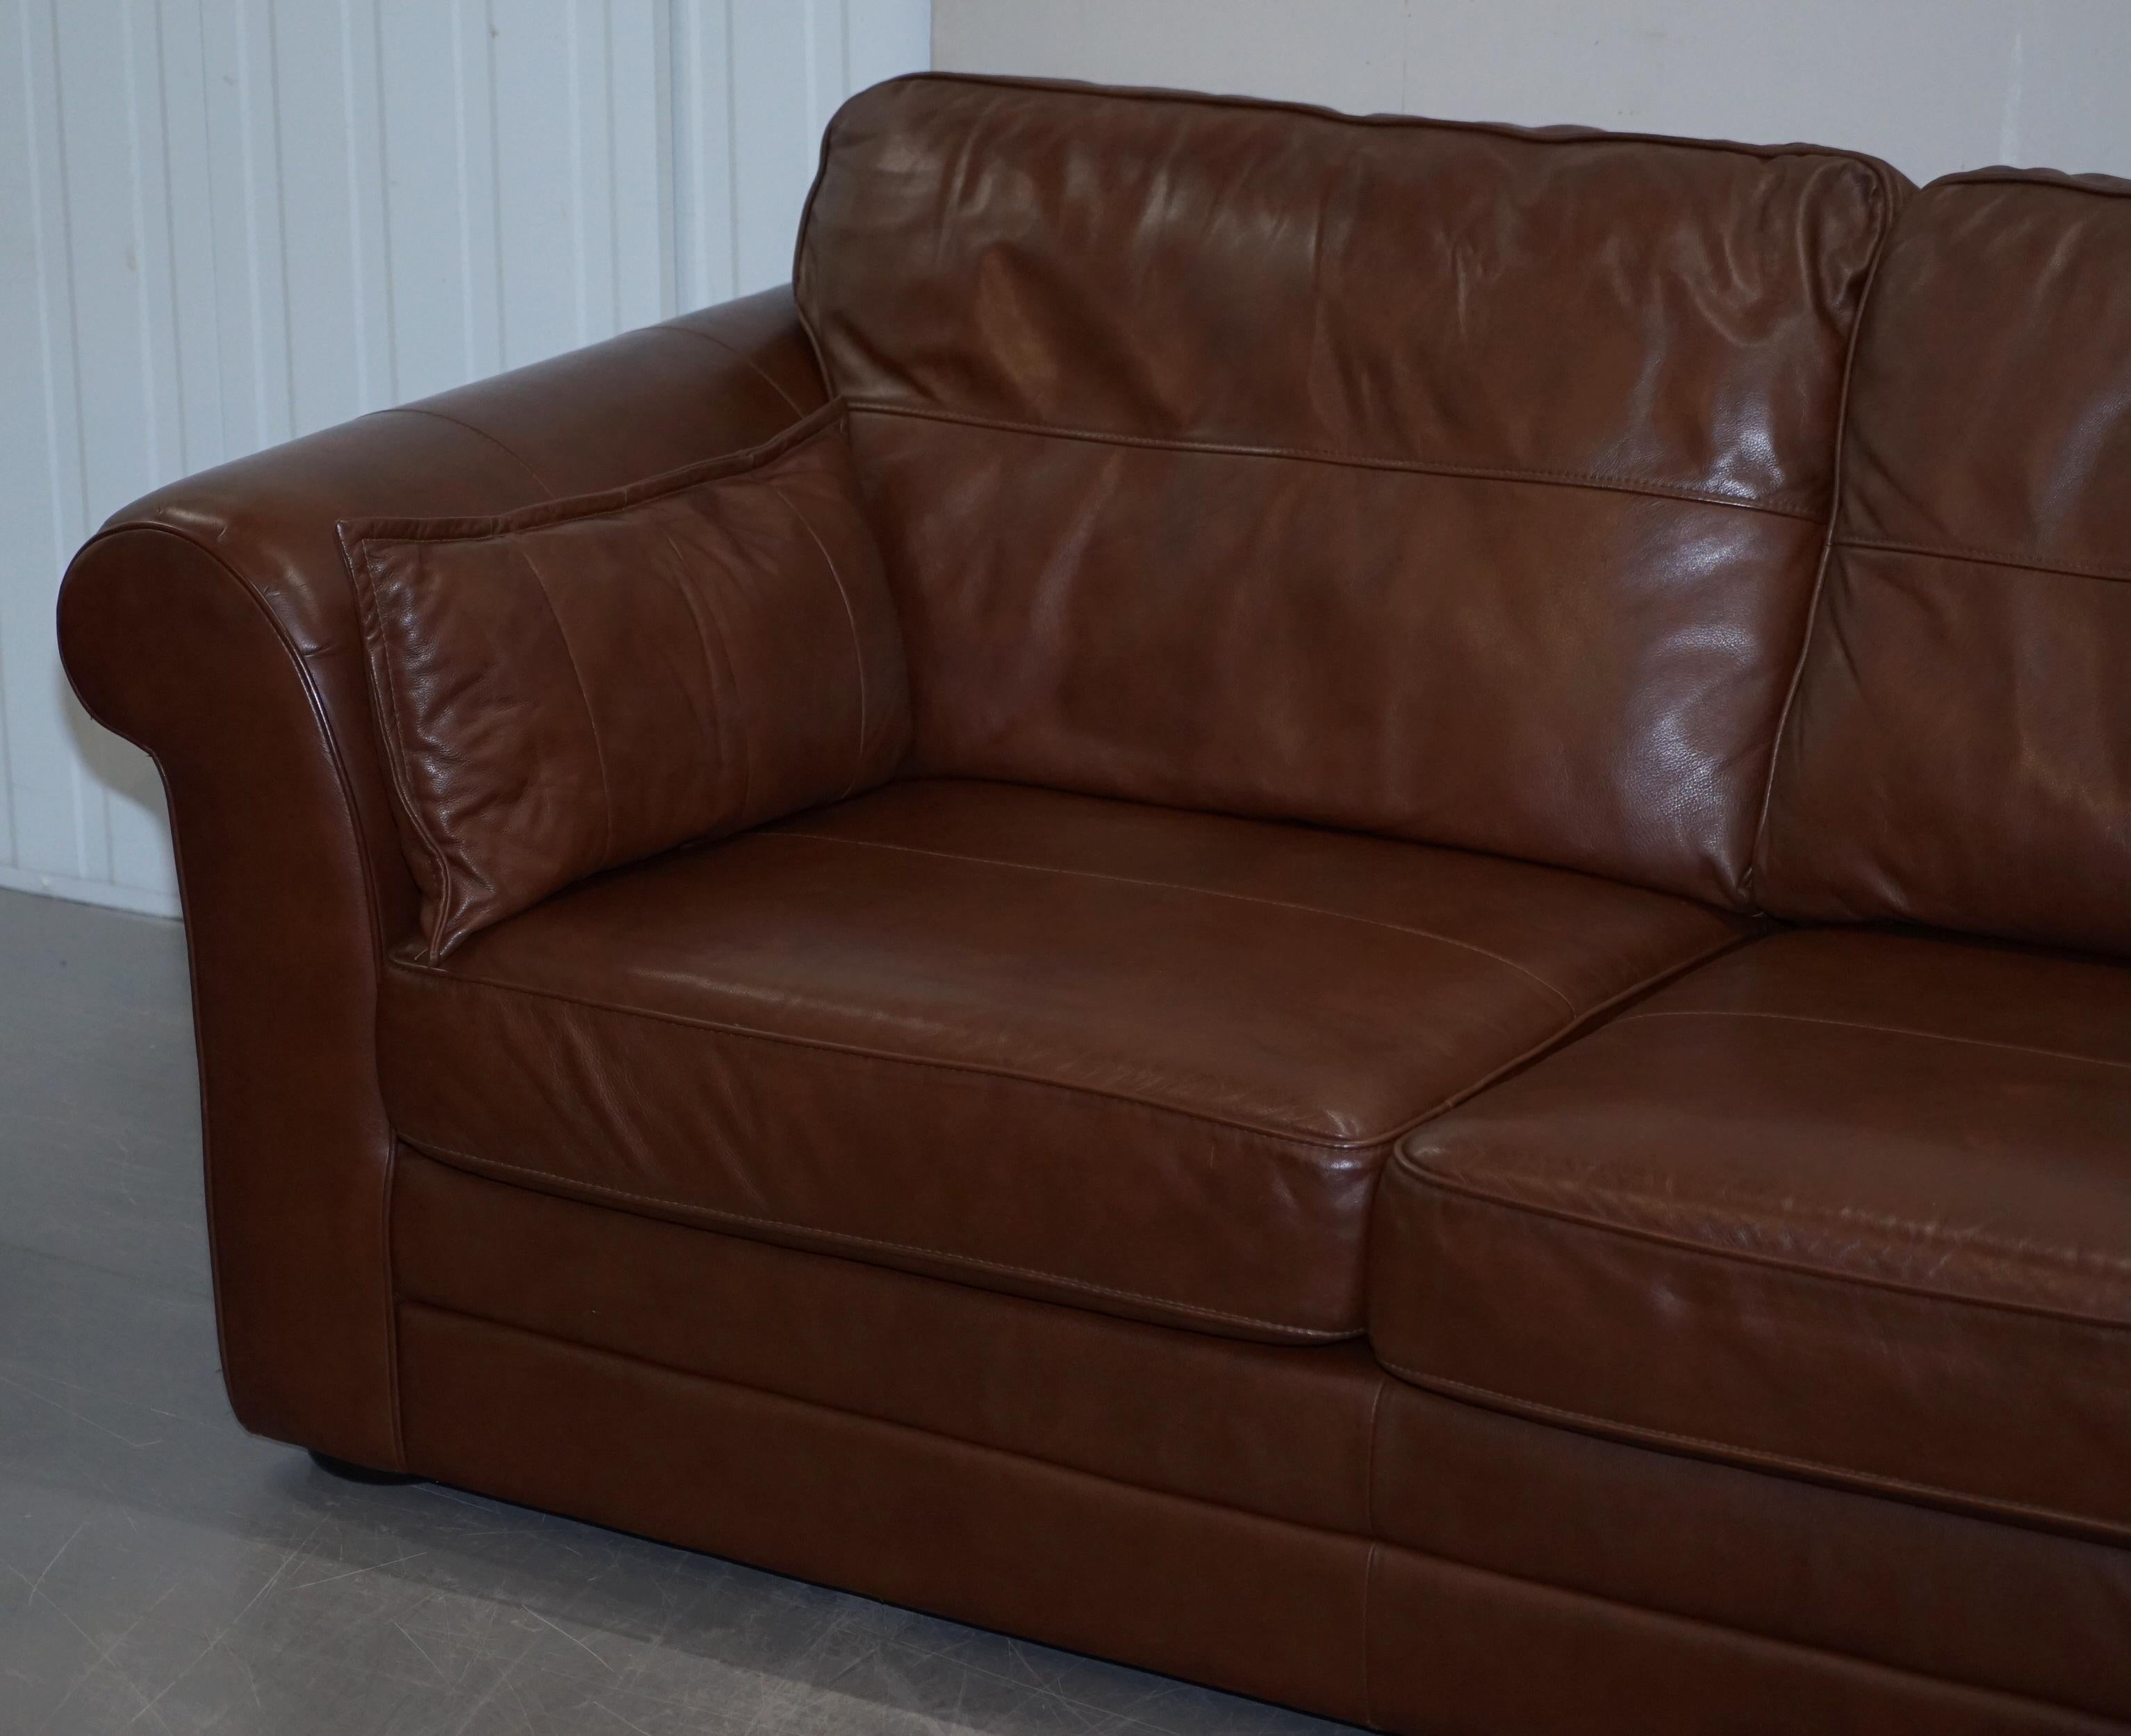 Other Contemporary Brown Leather Large Comfortable Three Seat Sofa Part of Large Suite